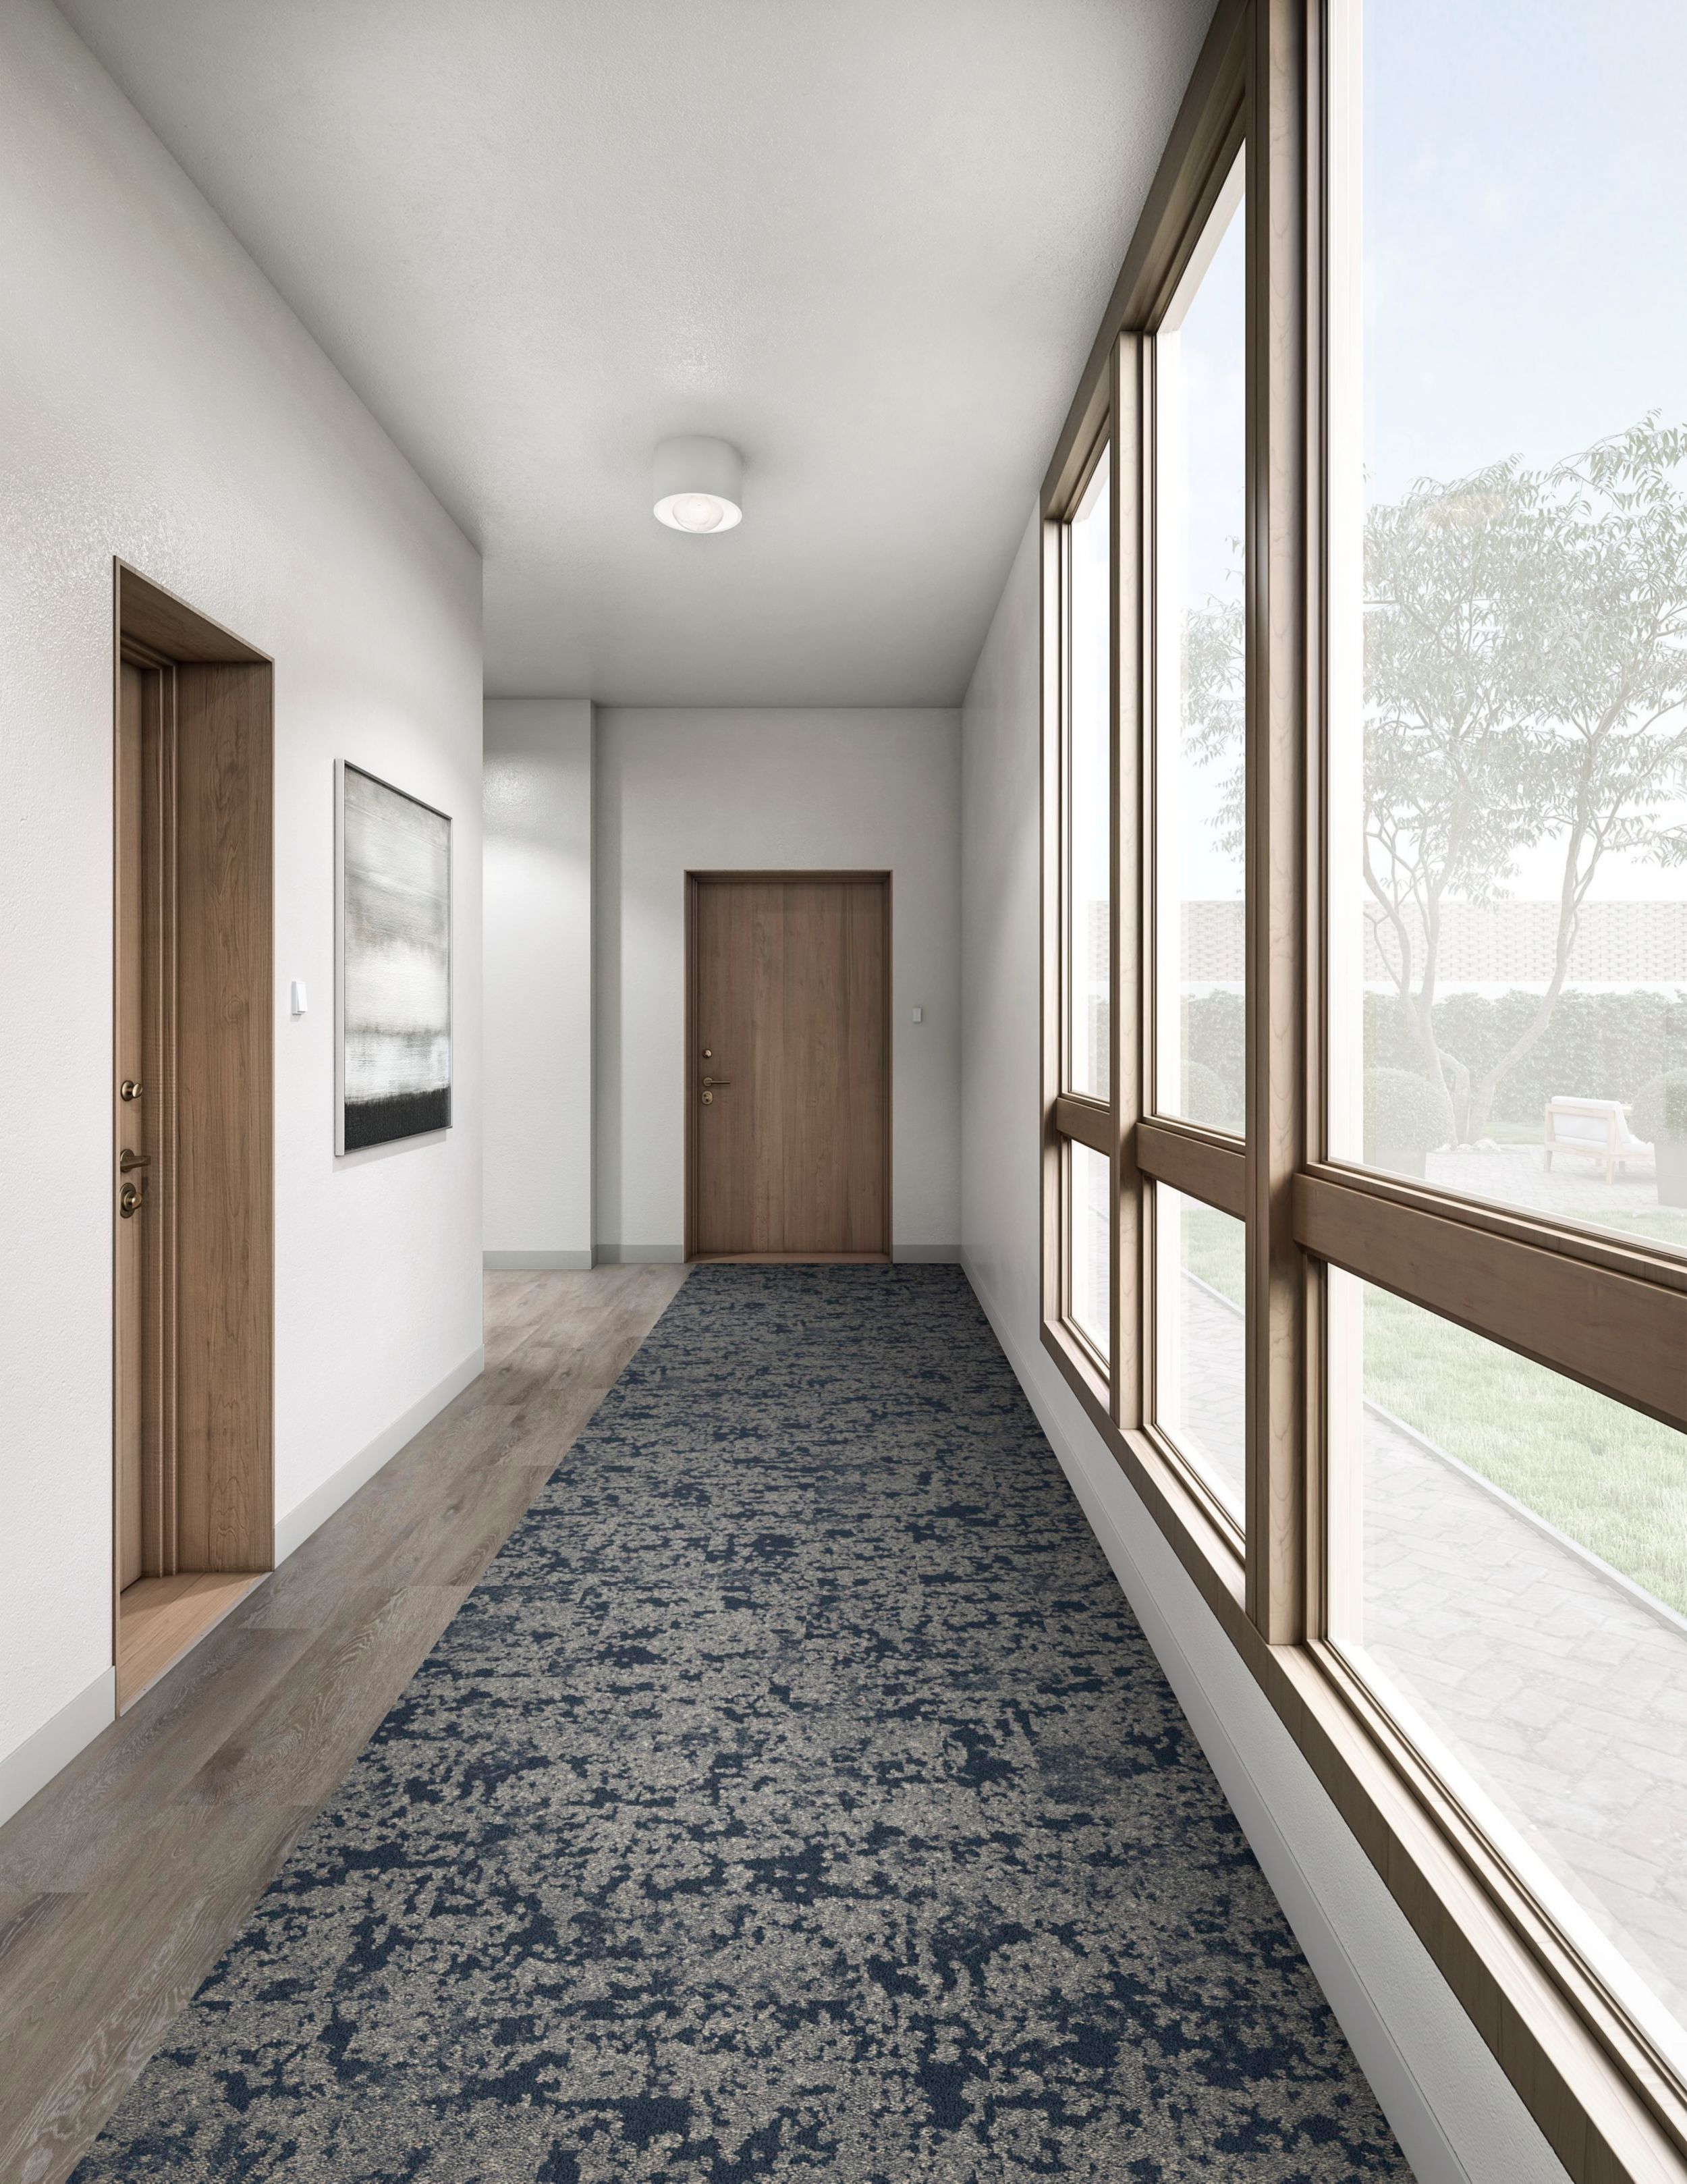 Interface Meadowland carpet tile in hallway with wooden door at end image number 3